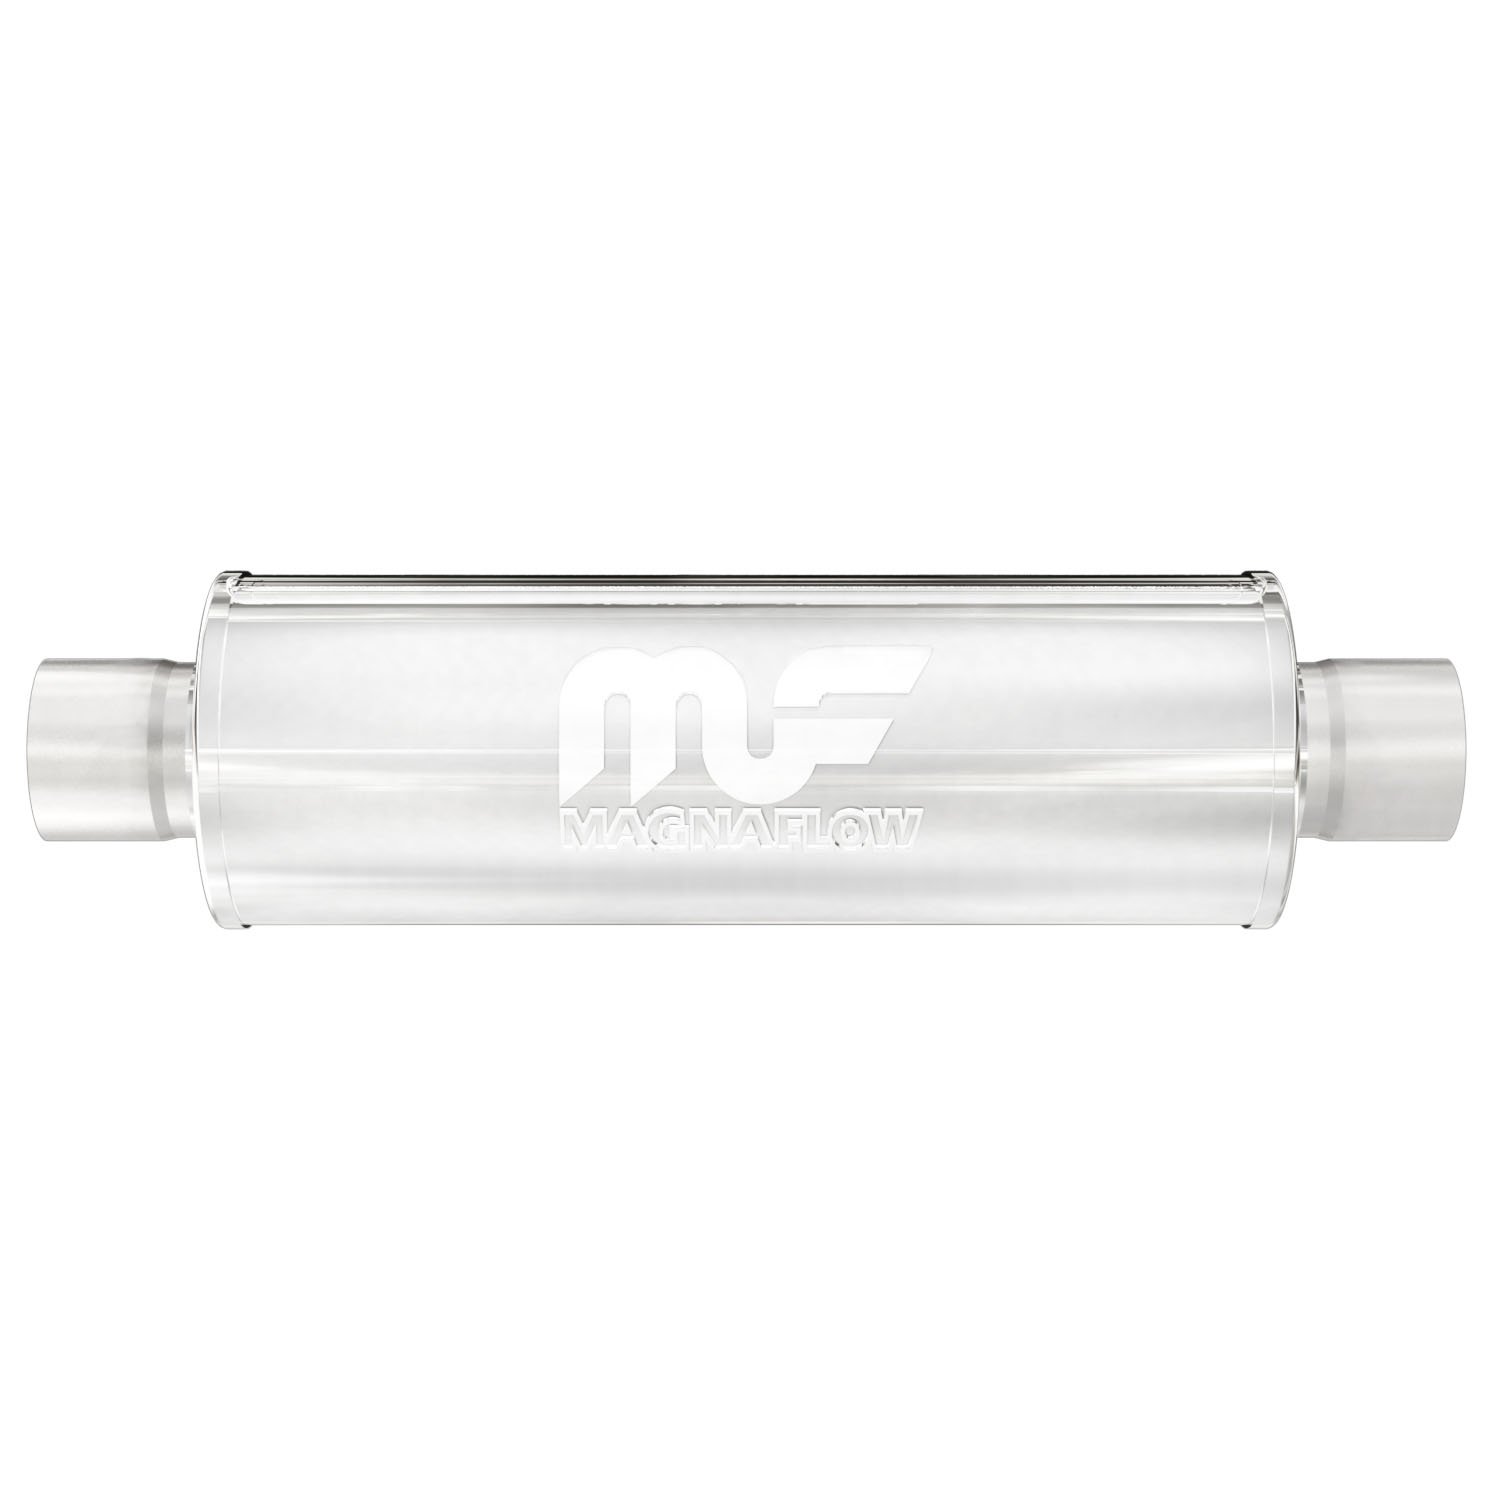 4" Round Muffler, Center In/Center Out: 3", Body Length: 14", Overall Length: 20", Core Size: 2.5" 4" Round Muffler, Center In/C